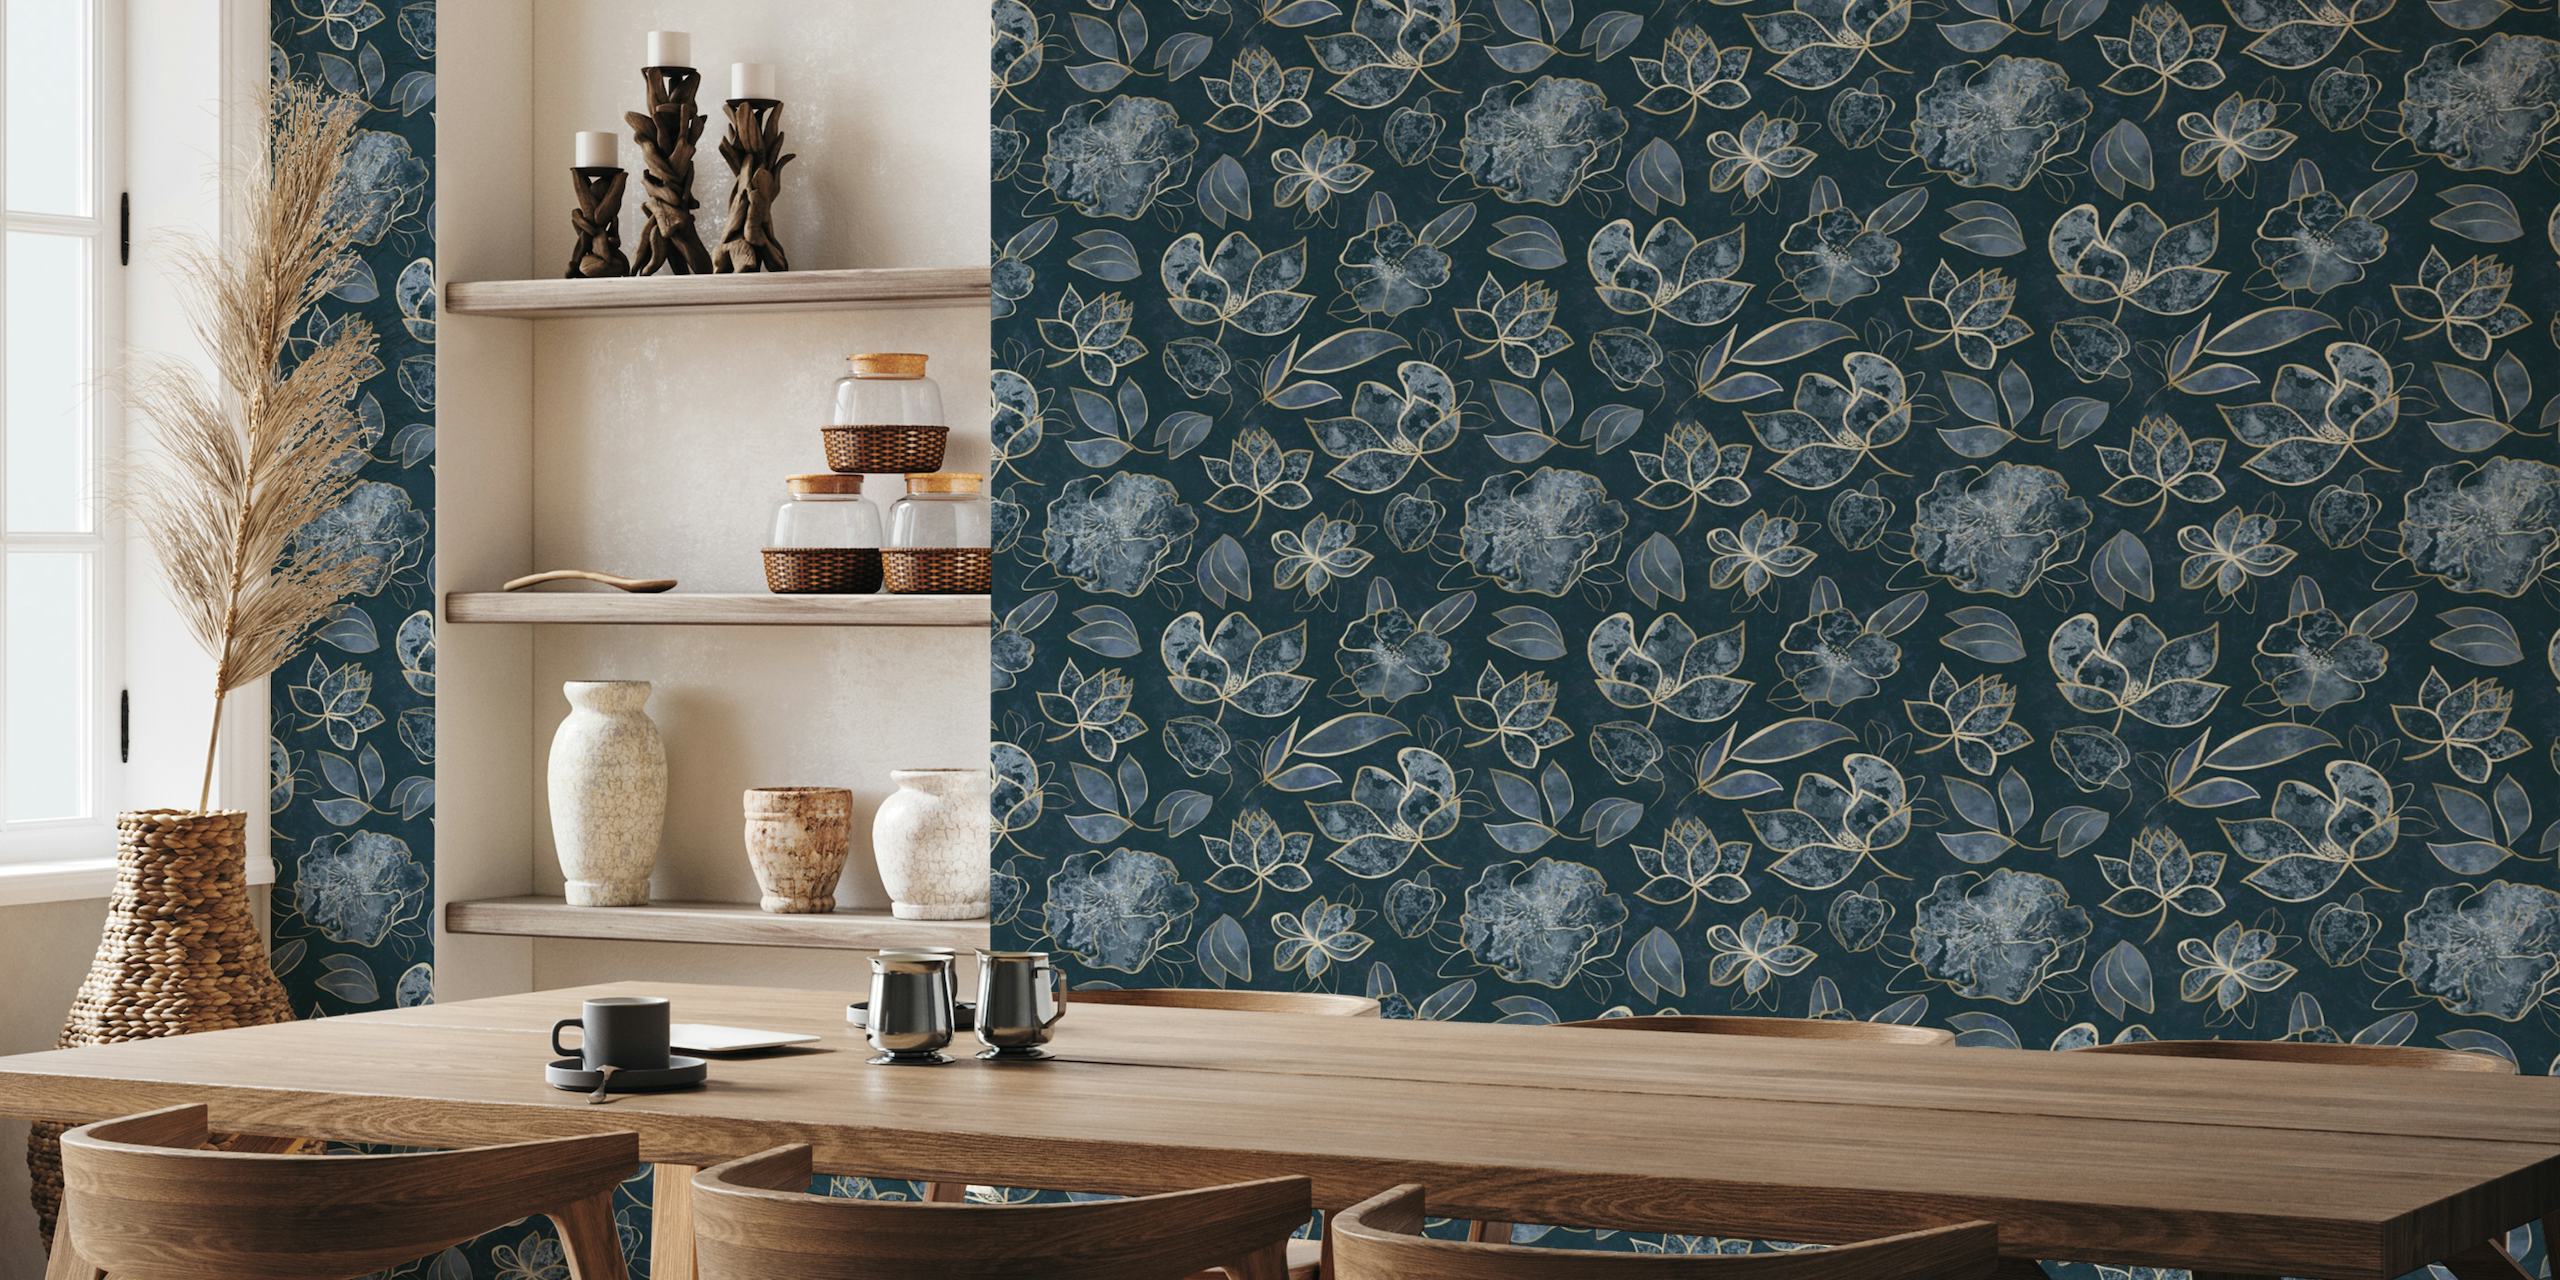 Elegant And Fancy Fantasy Flower Pattern In Turquoise And Gold wallpaper